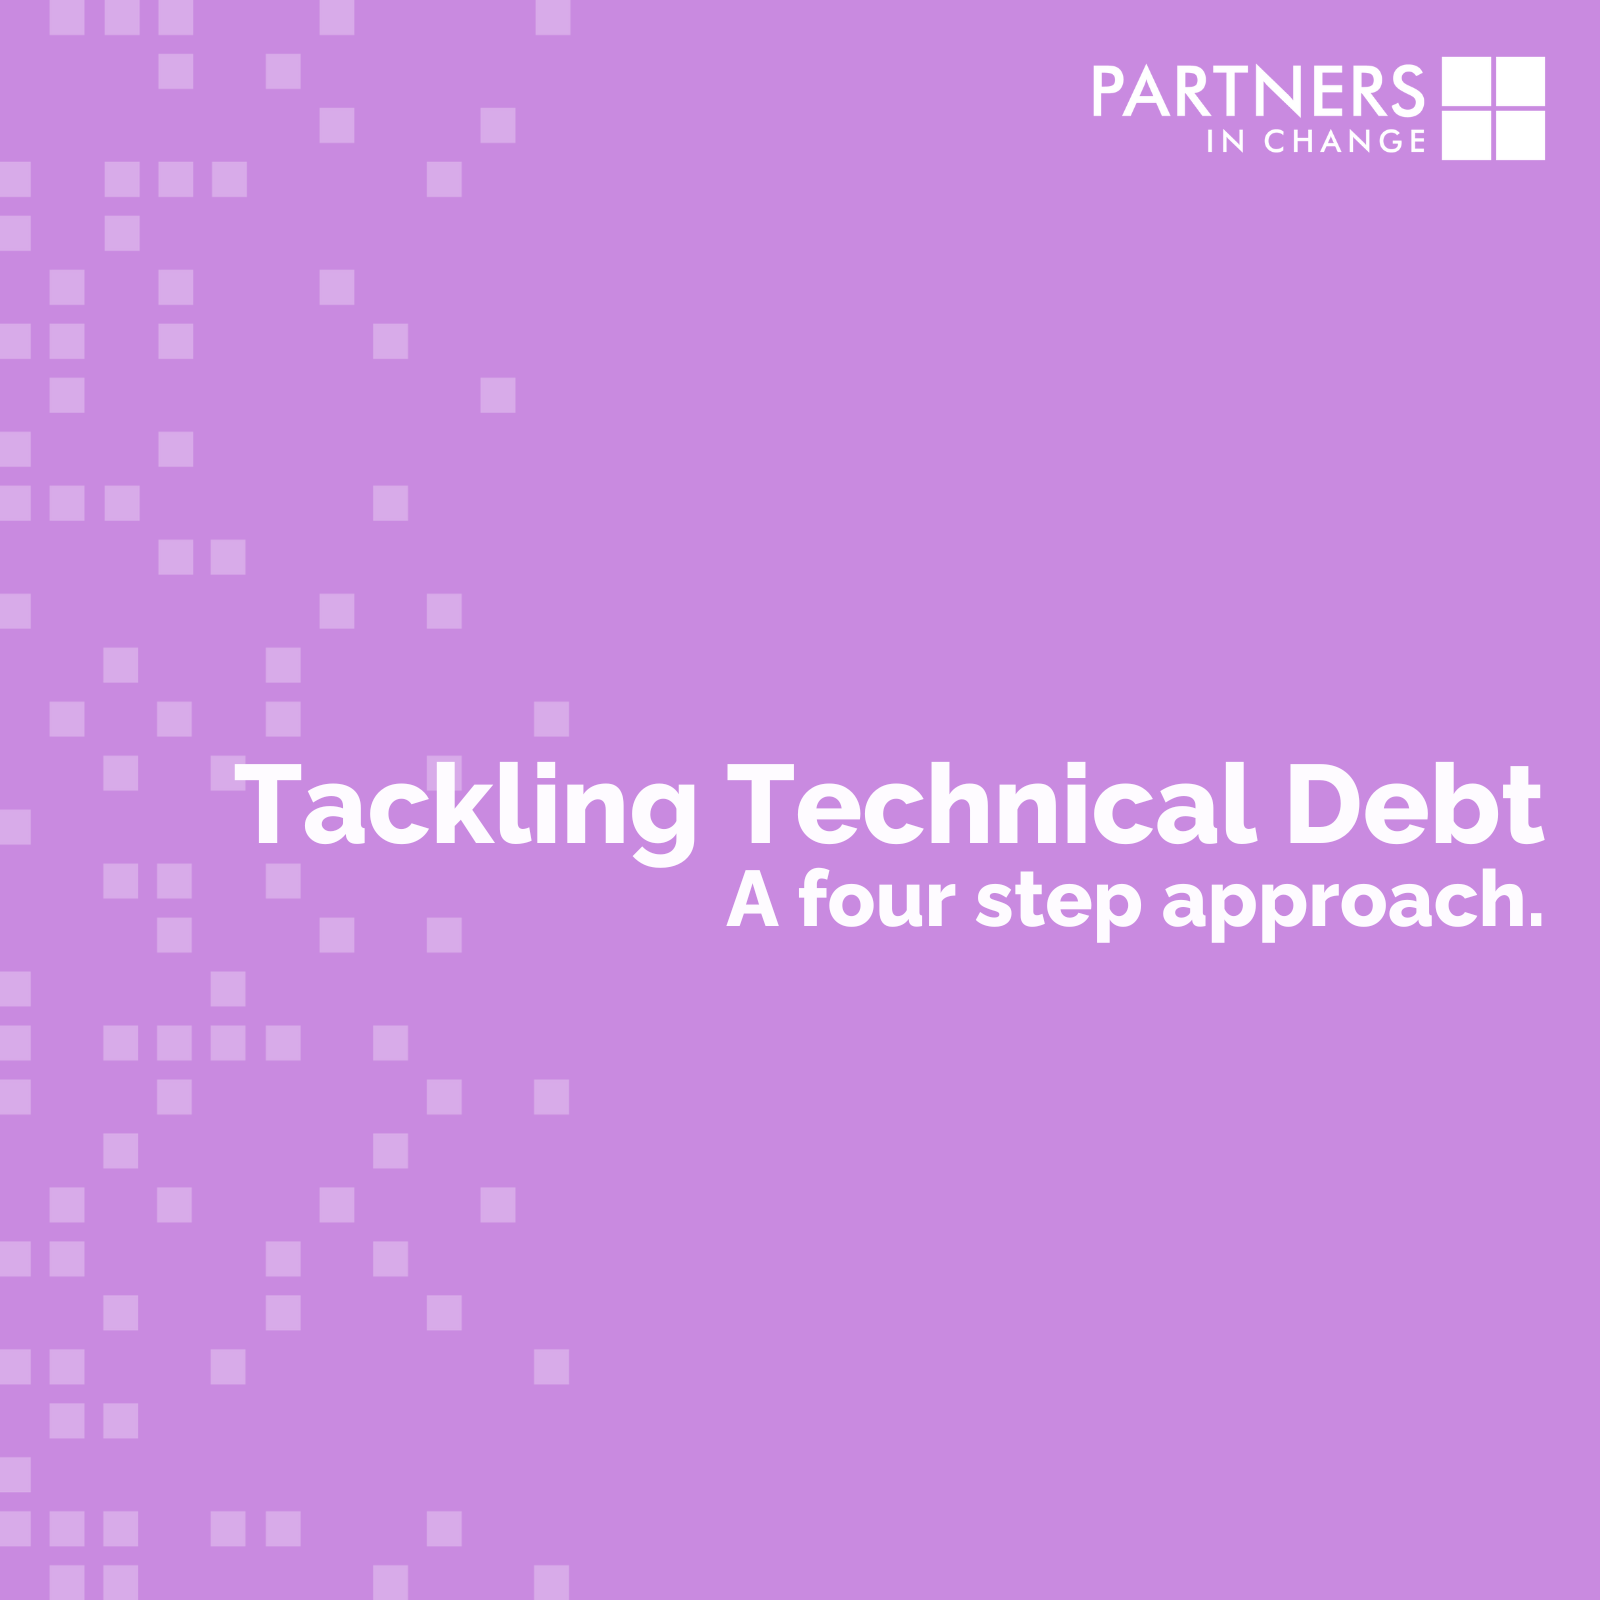 Tackling Legacy Technical Debt – a Four Step Approach